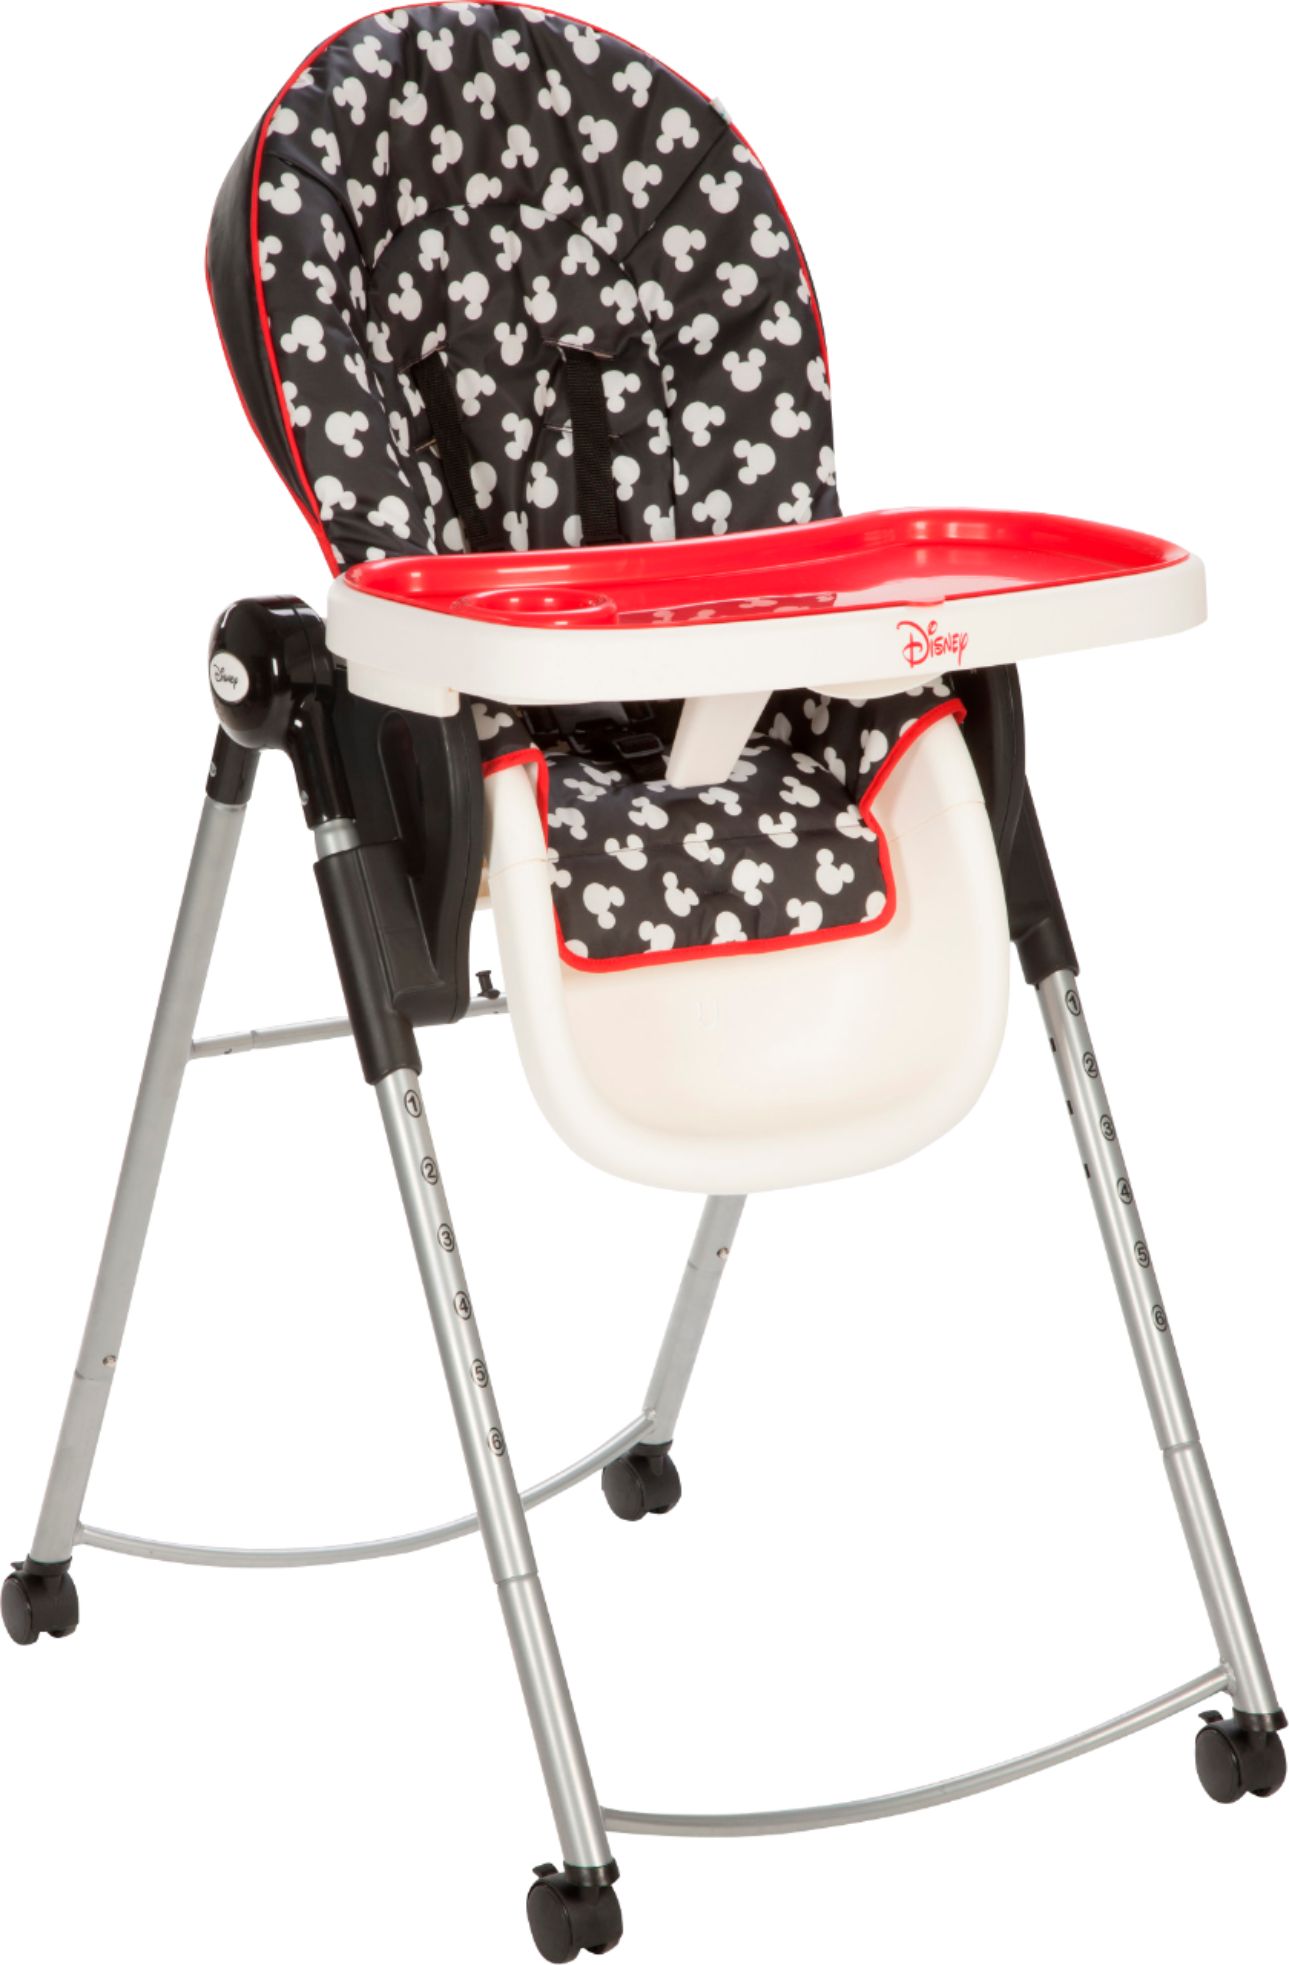 Angle View: Disney Baby AdjusTable High Chair, Mickey Silhouette